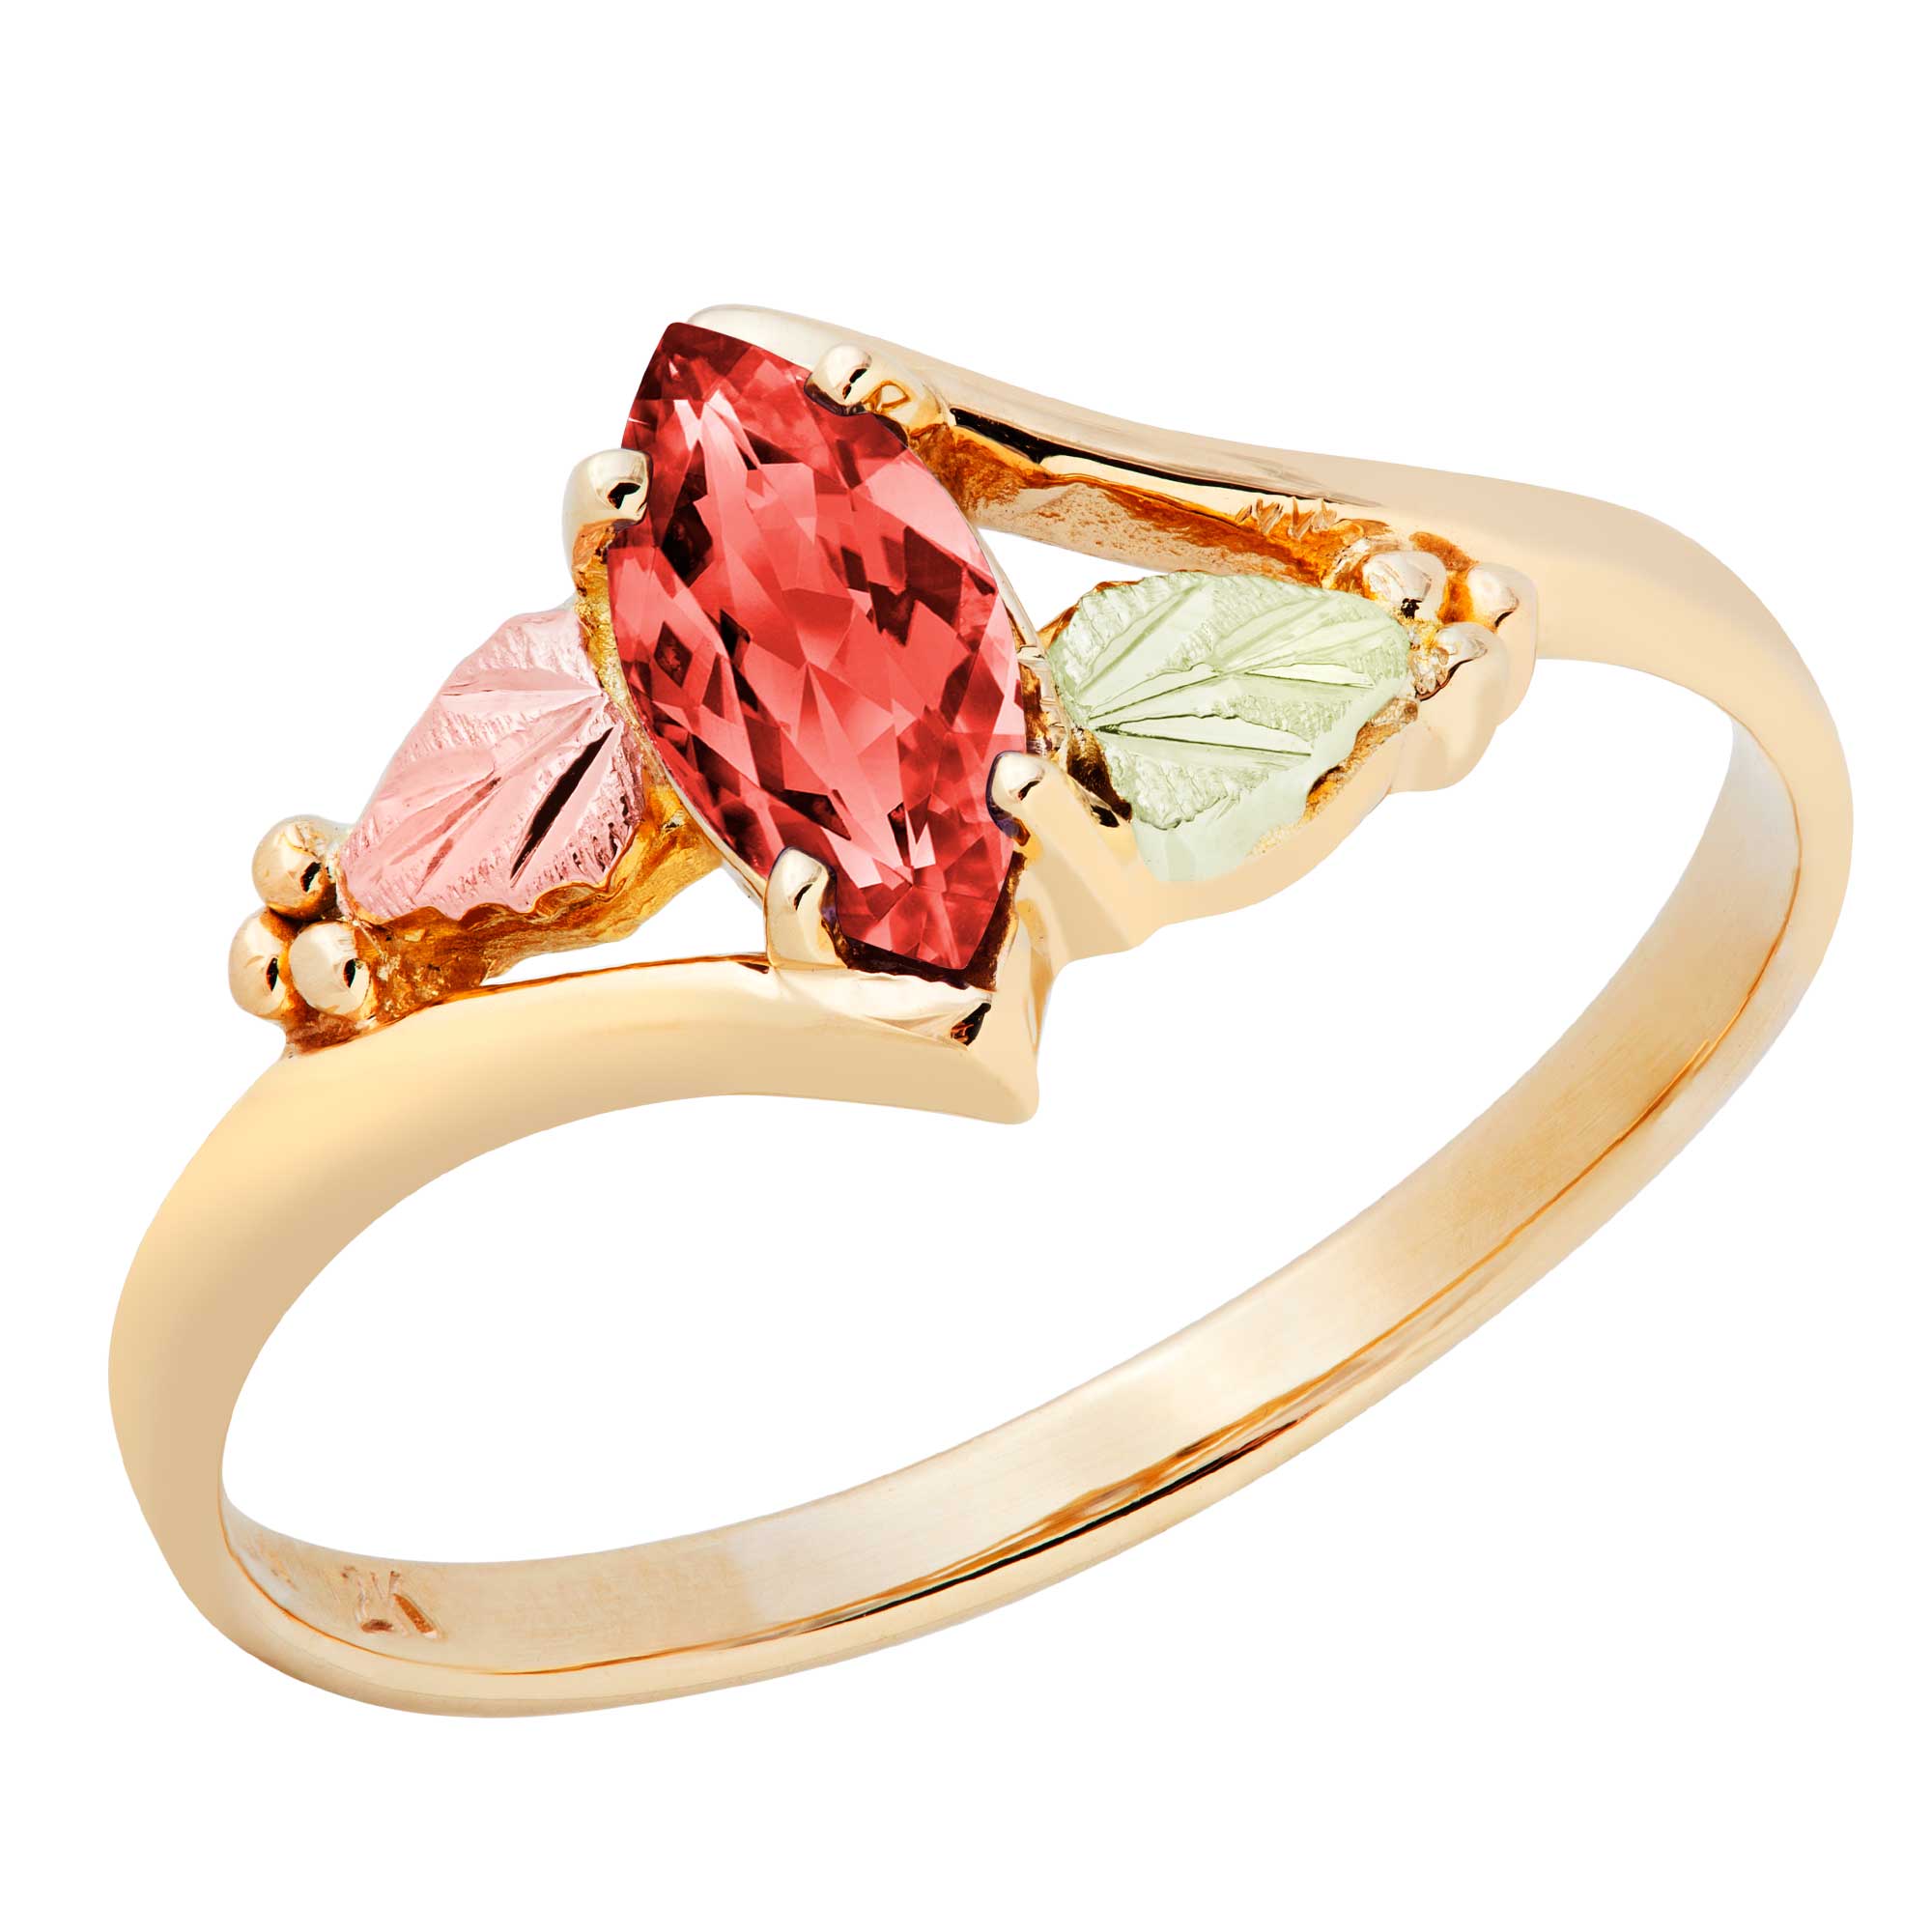 Created Garnet Marquise January Birthstone Bypass Ring Black Hills Gold motif. 